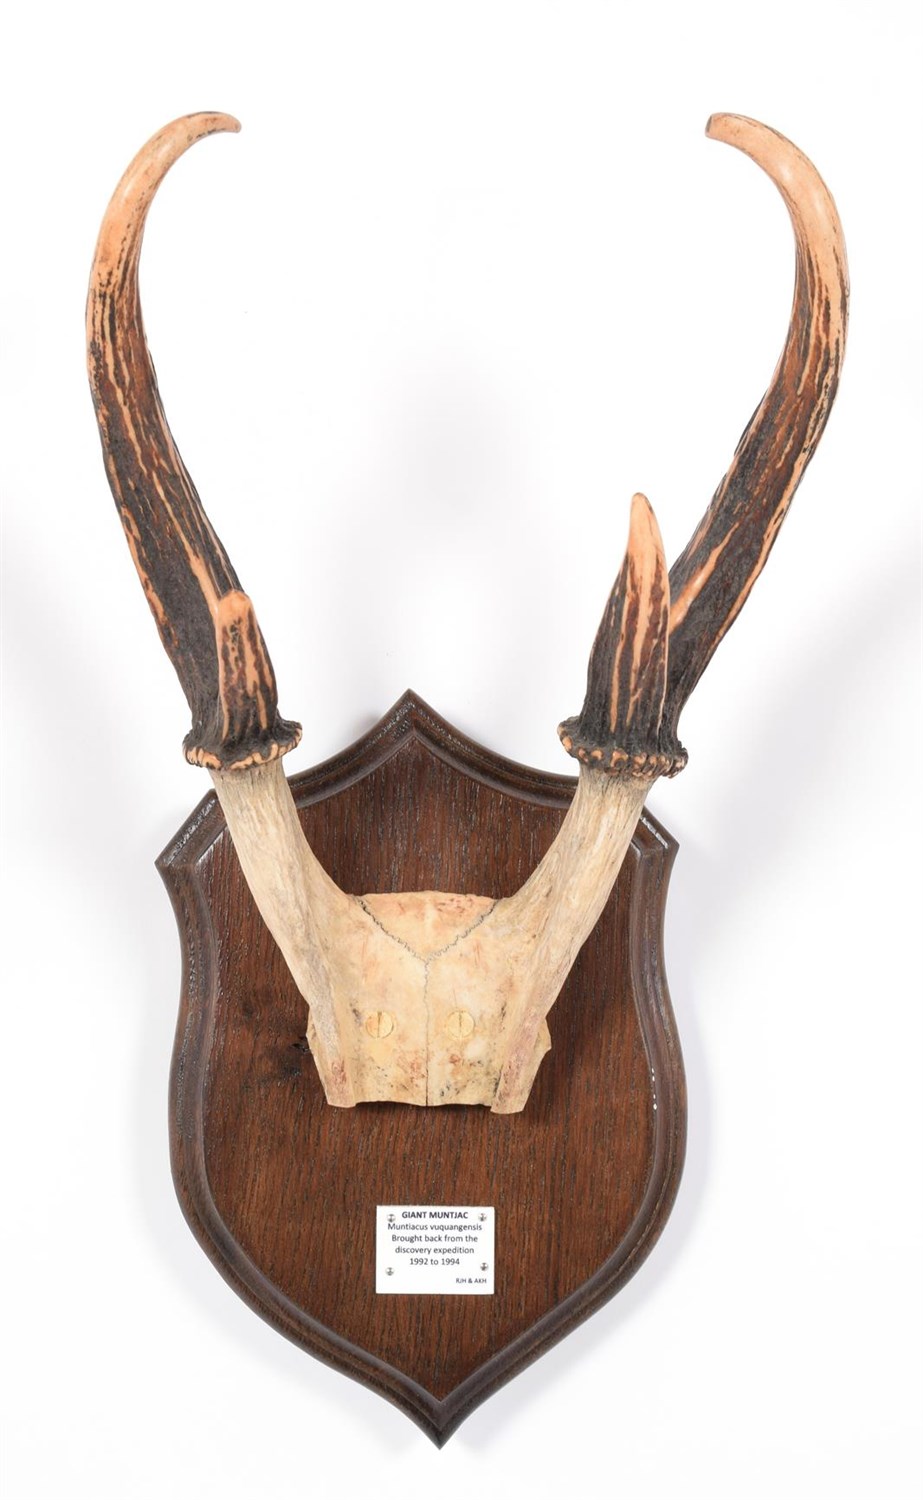 Lot 85 - Antlers/Horns: Giant Muntjac (Muntiacus vuquangensis), Vietnam, Brought back from the Discovery...